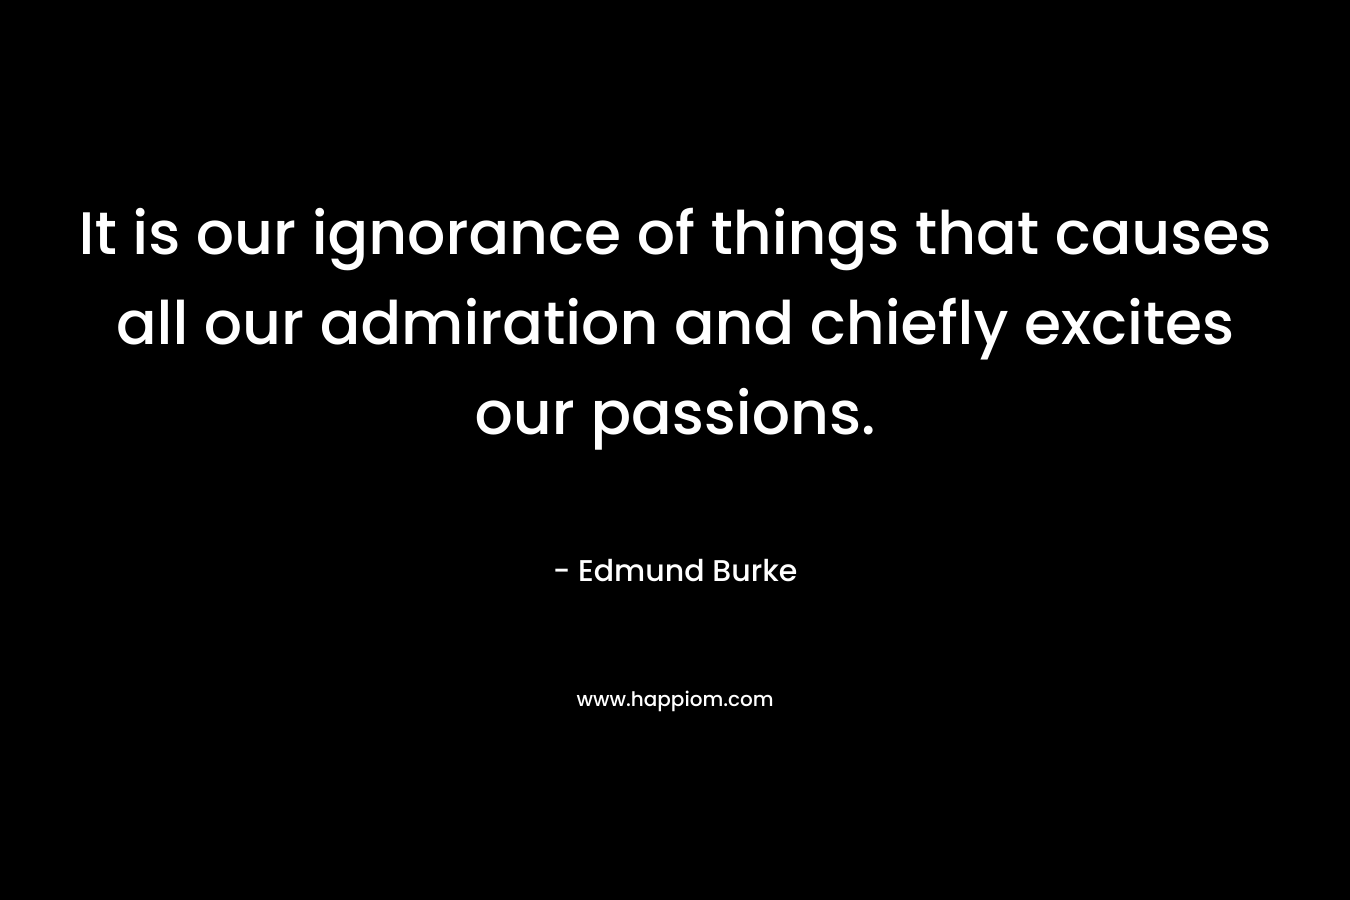 It is our ignorance of things that causes all our admiration and chiefly excites our passions. – Edmund Burke